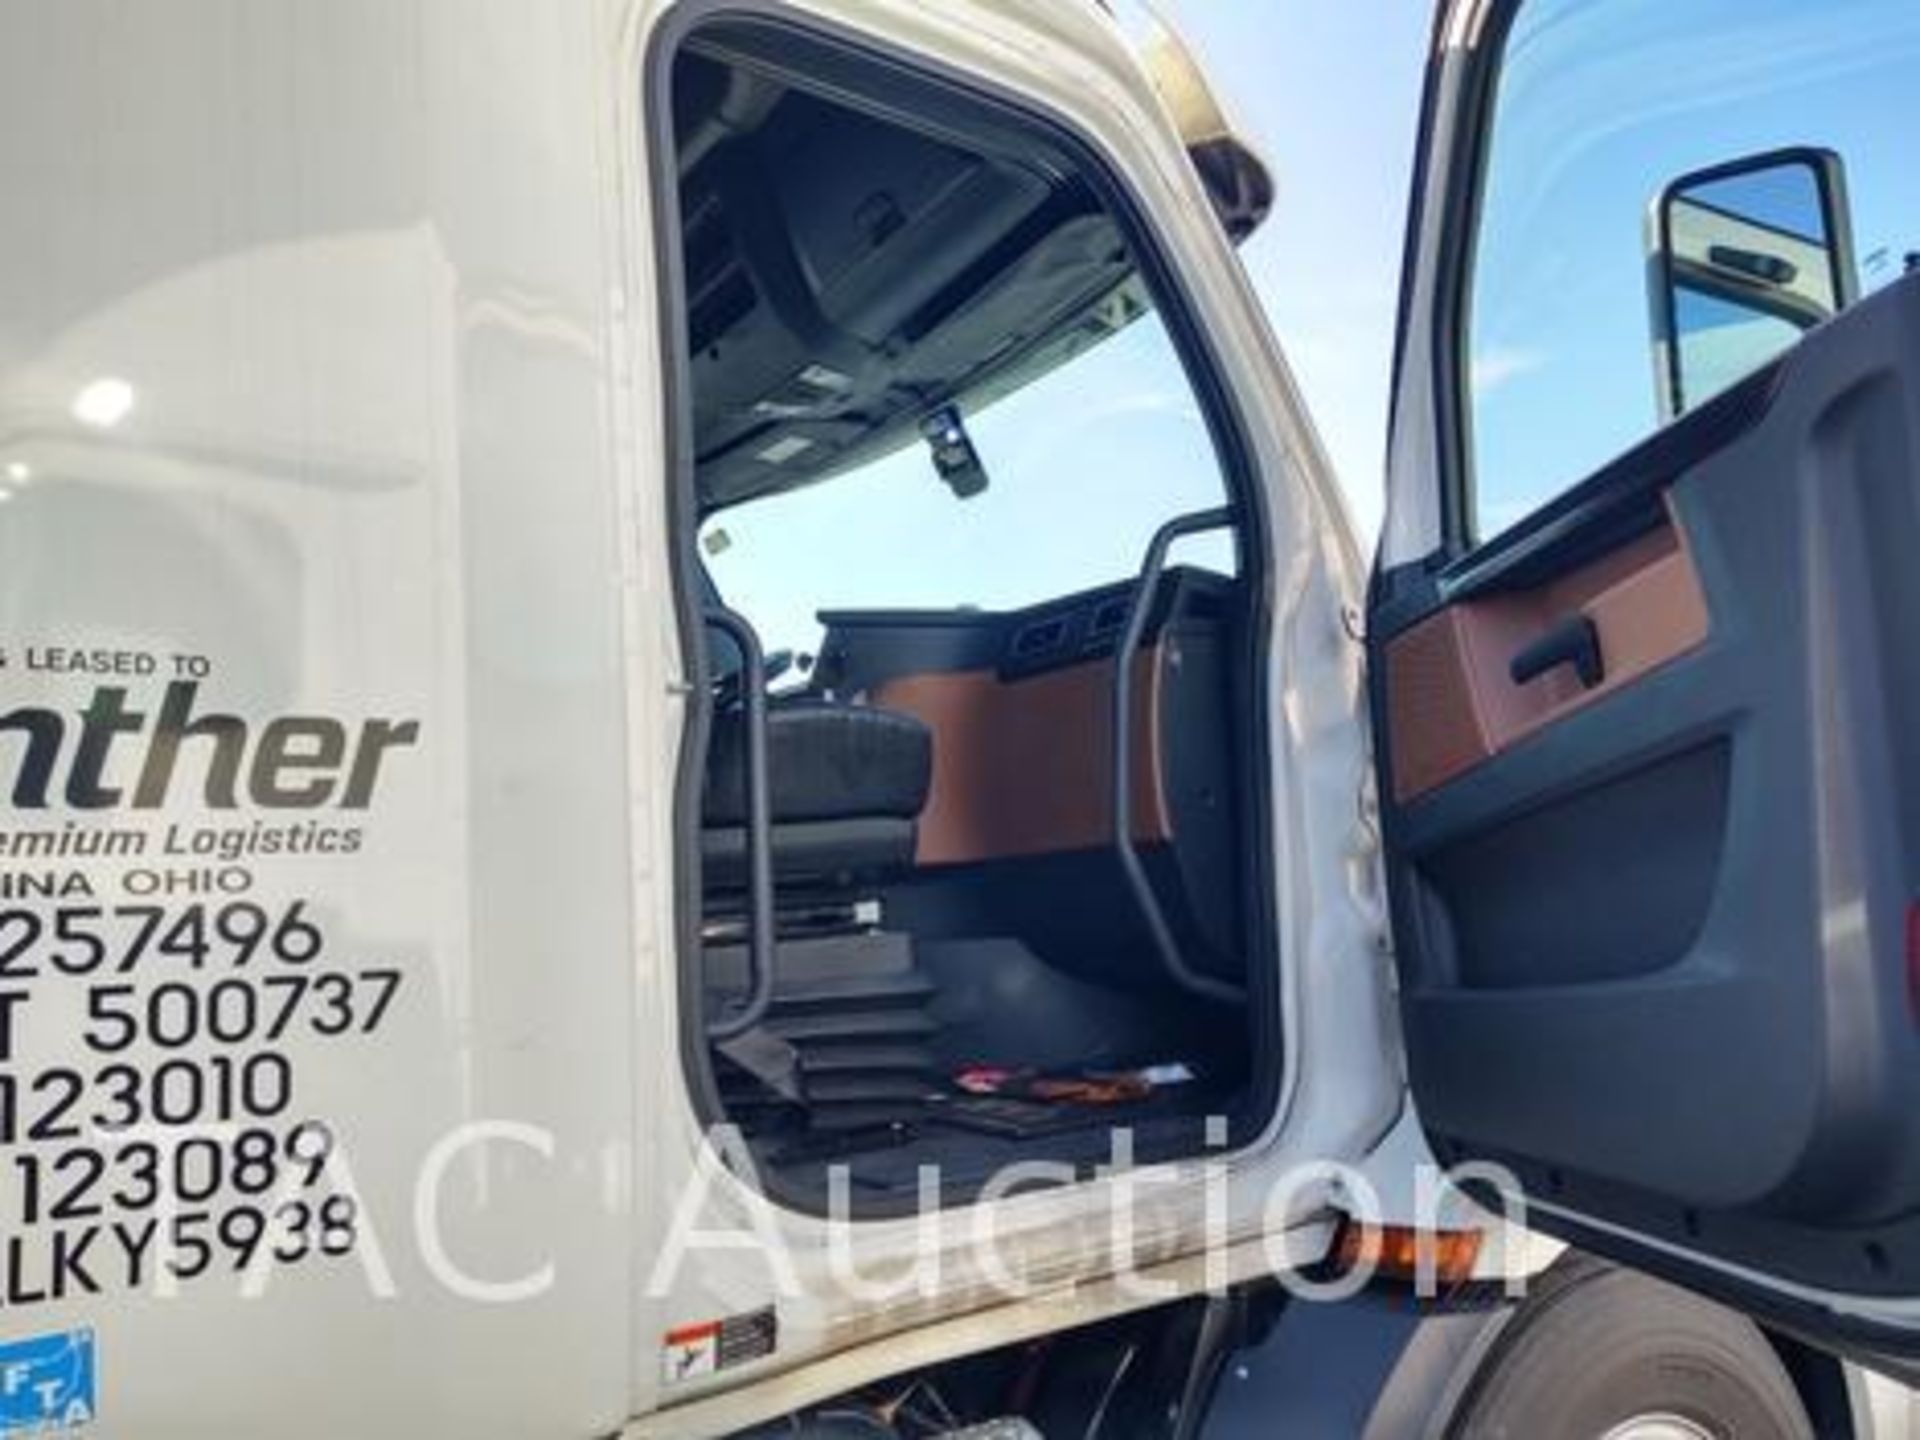 2020 Freightliner Cascadia 126 Expediter Truck - Image 36 of 98